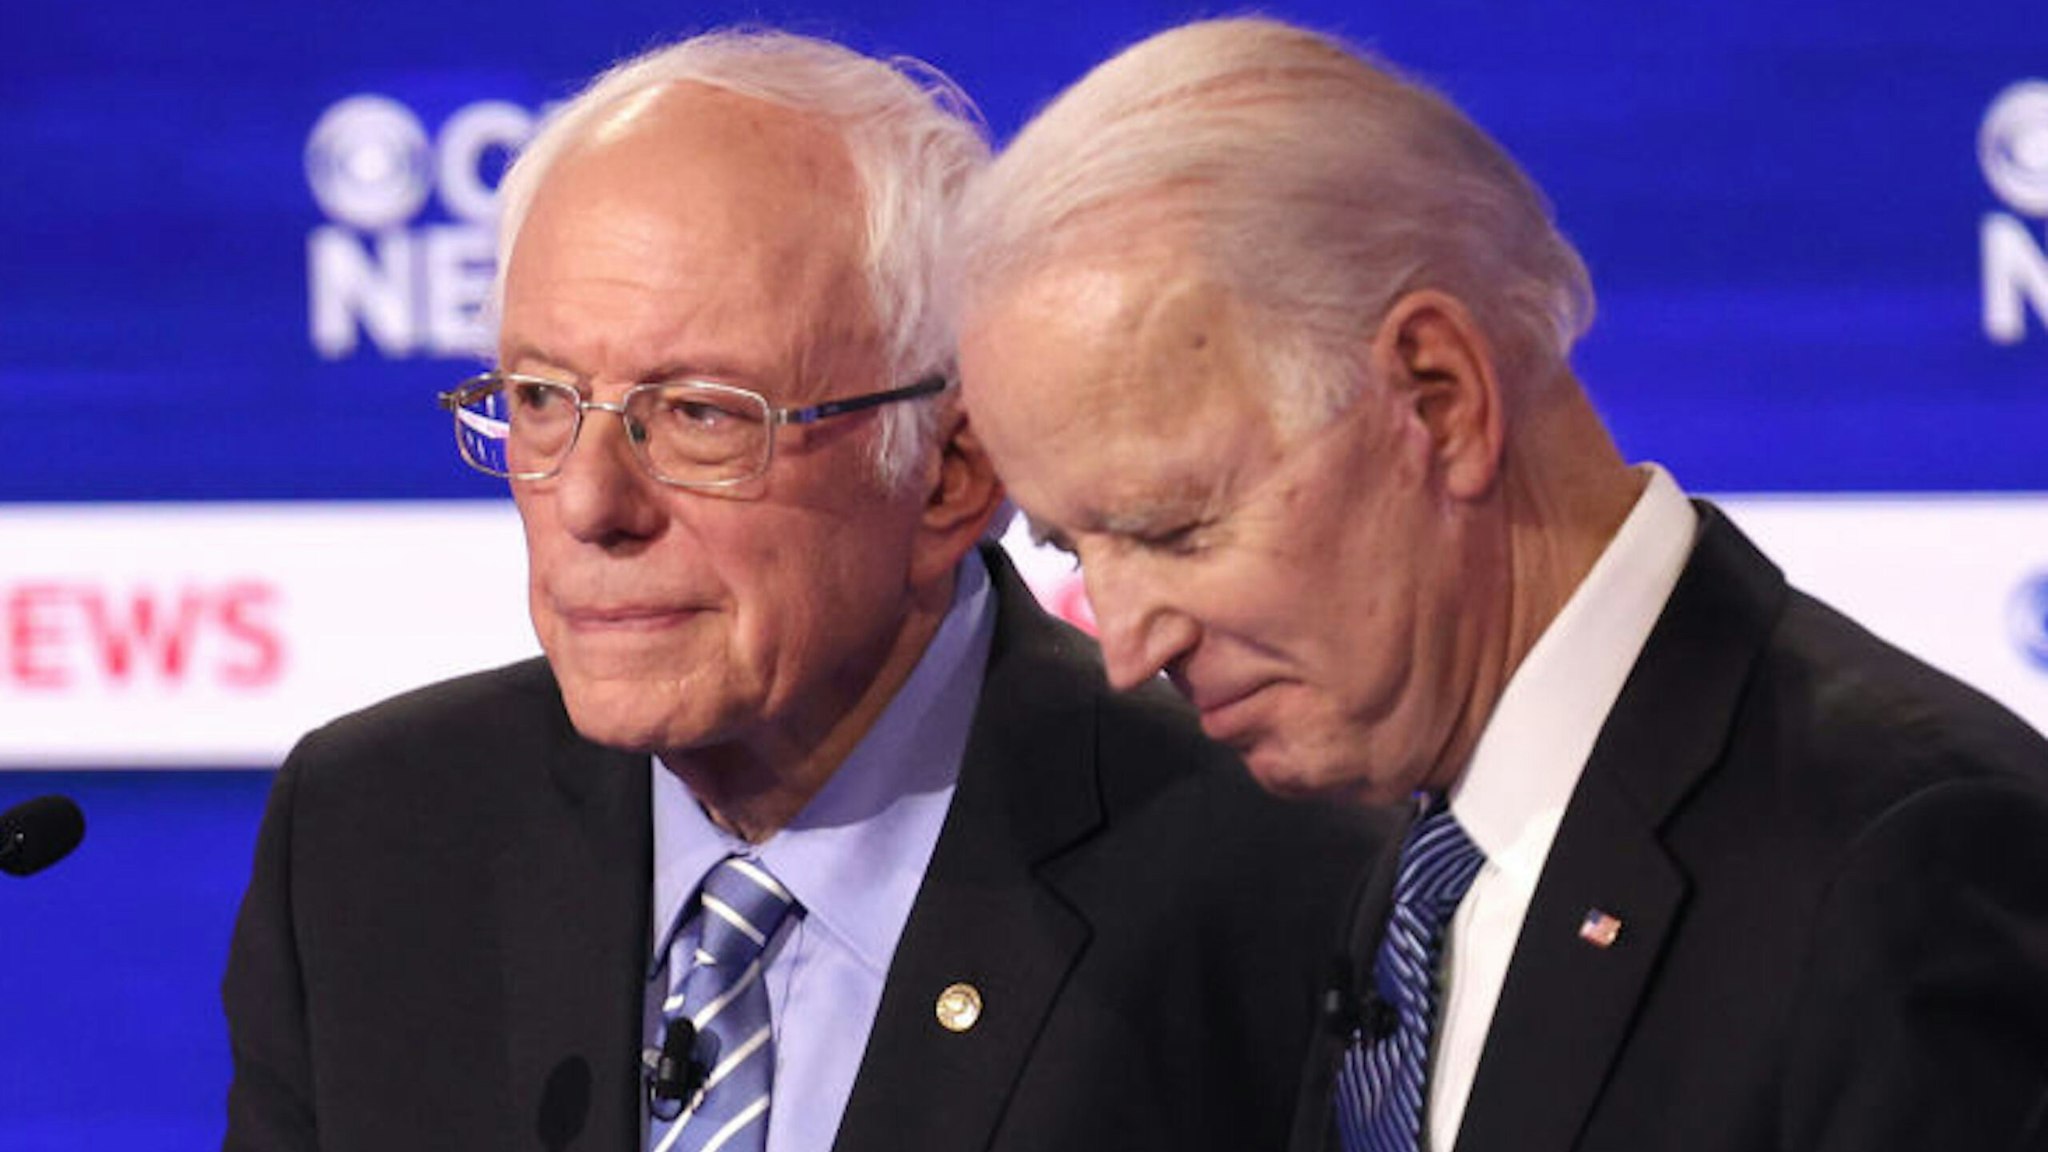 CHARLESTON, SOUTH CAROLINA - FEBRUARY 25: Democratic presidential candidates Sen. Bernie Sanders (I-VT) and former Vice President Joe Biden speak during a break at the Democratic presidential primary debate at the Charleston Gaillard Center on February 25, 2020 in Charleston, South Carolina. Seven candidates qualified for the debate, hosted by CBS News and Congressional Black Caucus Institute, ahead of South Carolina‚Äôs primary in four days.